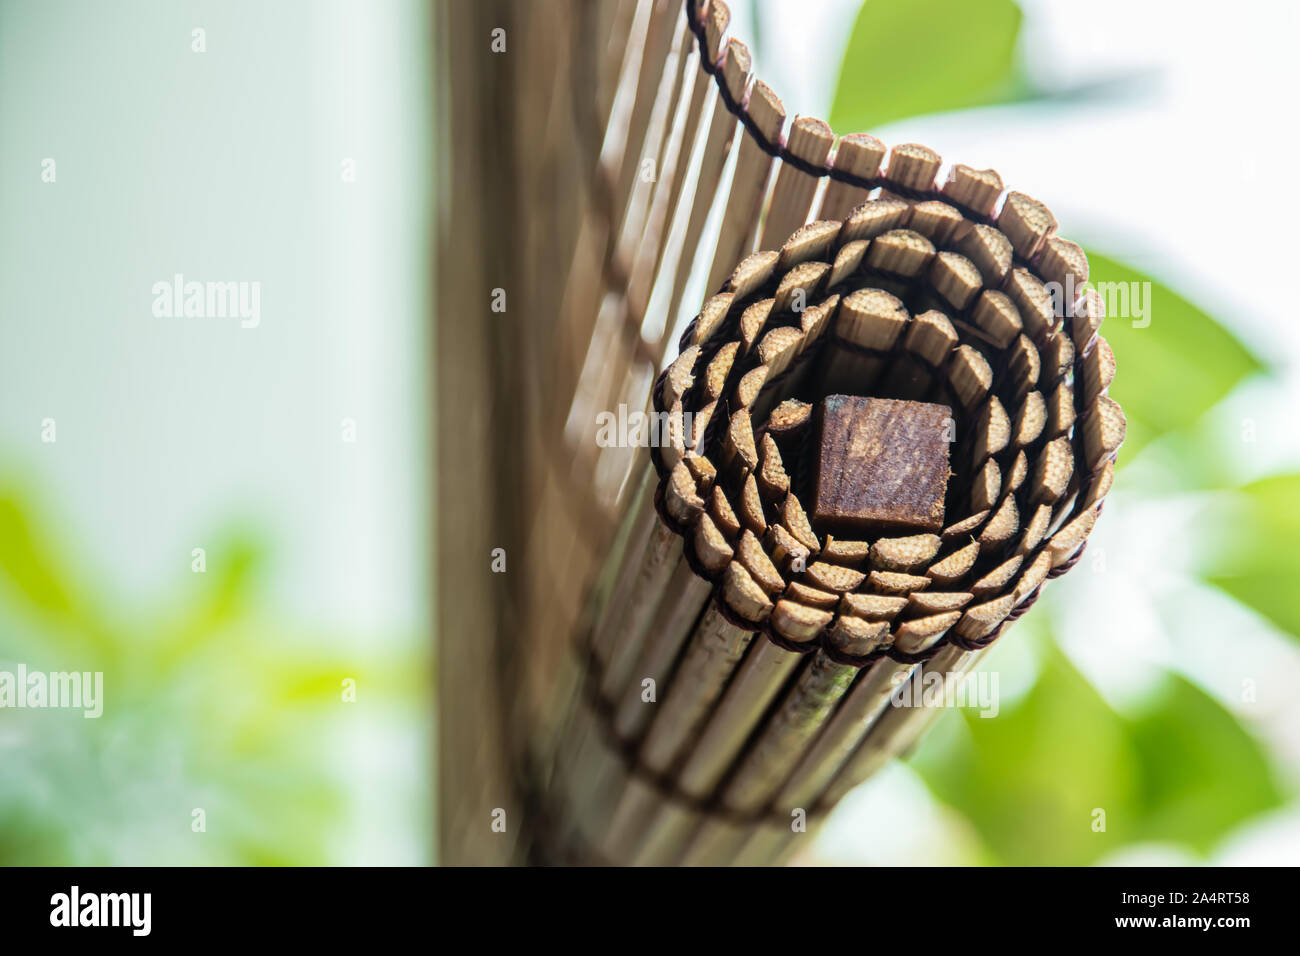 green plant with traditional style bamboo curtain Stock Photo